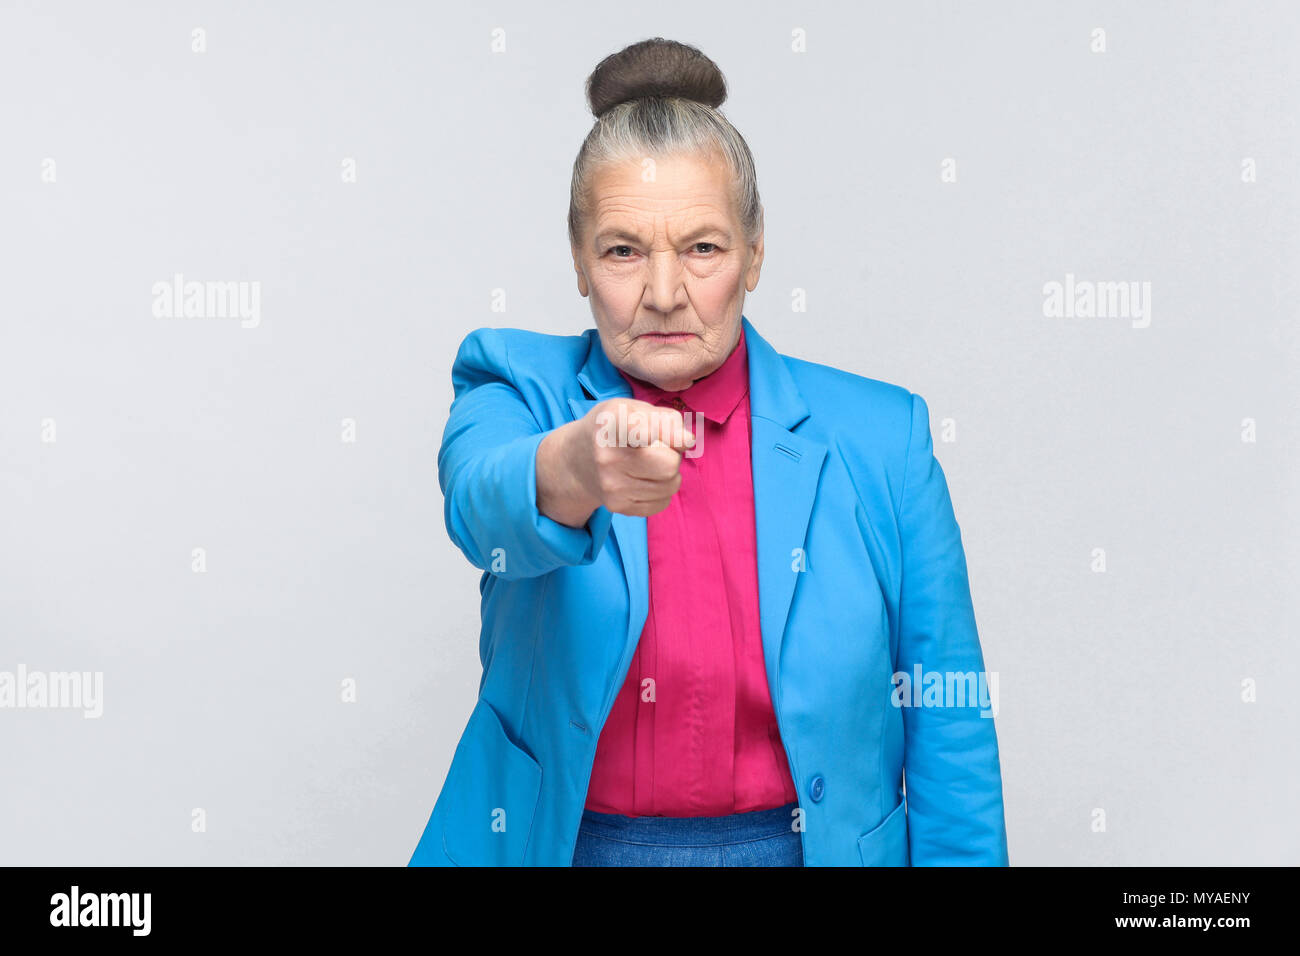 Hey you! Woman pointing at camera finger with serious face. Emotion and feelings concept. Portrait of expressive grandmother standing with collected g Stock Photo